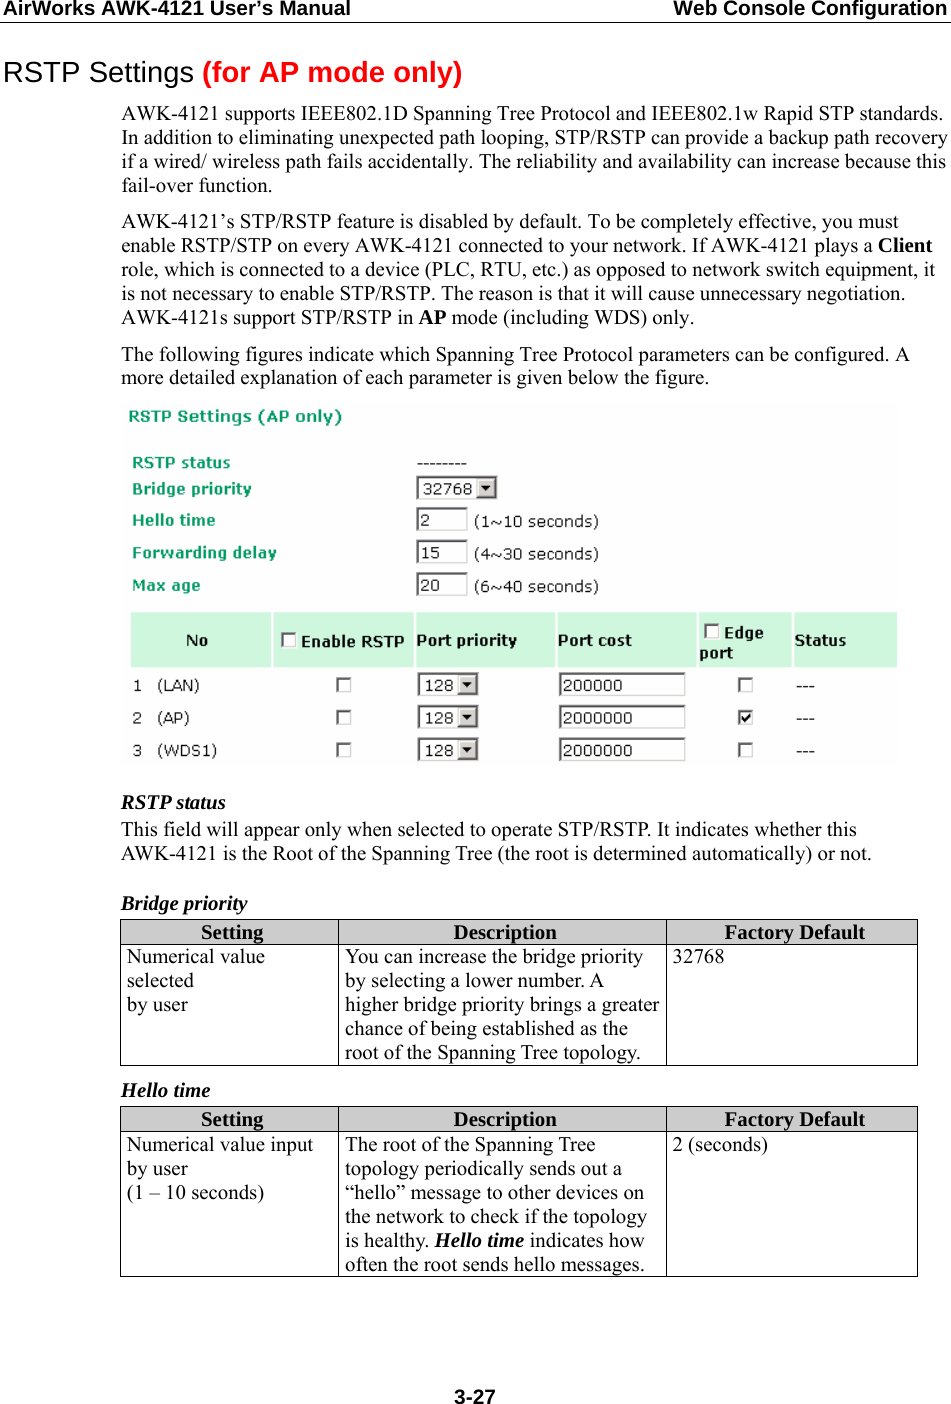 AirWorks AWK-4121 User’s Manual  Web Console Configuration RSTP Settings (for AP mode only) AWK-4121 supports IEEE802.1D Spanning Tree Protocol and IEEE802.1w Rapid STP standards. In addition to eliminating unexpected path looping, STP/RSTP can provide a backup path recovery if a wired/ wireless path fails accidentally. The reliability and availability can increase because this fail-over function. AWK-4121’s STP/RSTP feature is disabled by default. To be completely effective, you must enable RSTP/STP on every AWK-4121 connected to your network. If AWK-4121 plays a Client role, which is connected to a device (PLC, RTU, etc.) as opposed to network switch equipment, it is not necessary to enable STP/RSTP. The reason is that it will cause unnecessary negotiation. AWK-4121s support STP/RSTP in AP mode (including WDS) only. The following figures indicate which Spanning Tree Protocol parameters can be configured. A more detailed explanation of each parameter is given below the figure.  RSTP status This field will appear only when selected to operate STP/RSTP. It indicates whether this AWK-4121 is the Root of the Spanning Tree (the root is determined automatically) or not. Bridge priority Setting  Description  Factory Default Numerical value selected by user You can increase the bridge priority by selecting a lower number. A higher bridge priority brings a greater chance of being established as the root of the Spanning Tree topology. 32768 Hello time Setting  Description  Factory Default Numerical value input by user (1 – 10 seconds) The root of the Spanning Tree topology periodically sends out a “hello” message to other devices on the network to check if the topology is healthy. Hello time indicates how often the root sends hello messages. 2 (seconds)    3-27